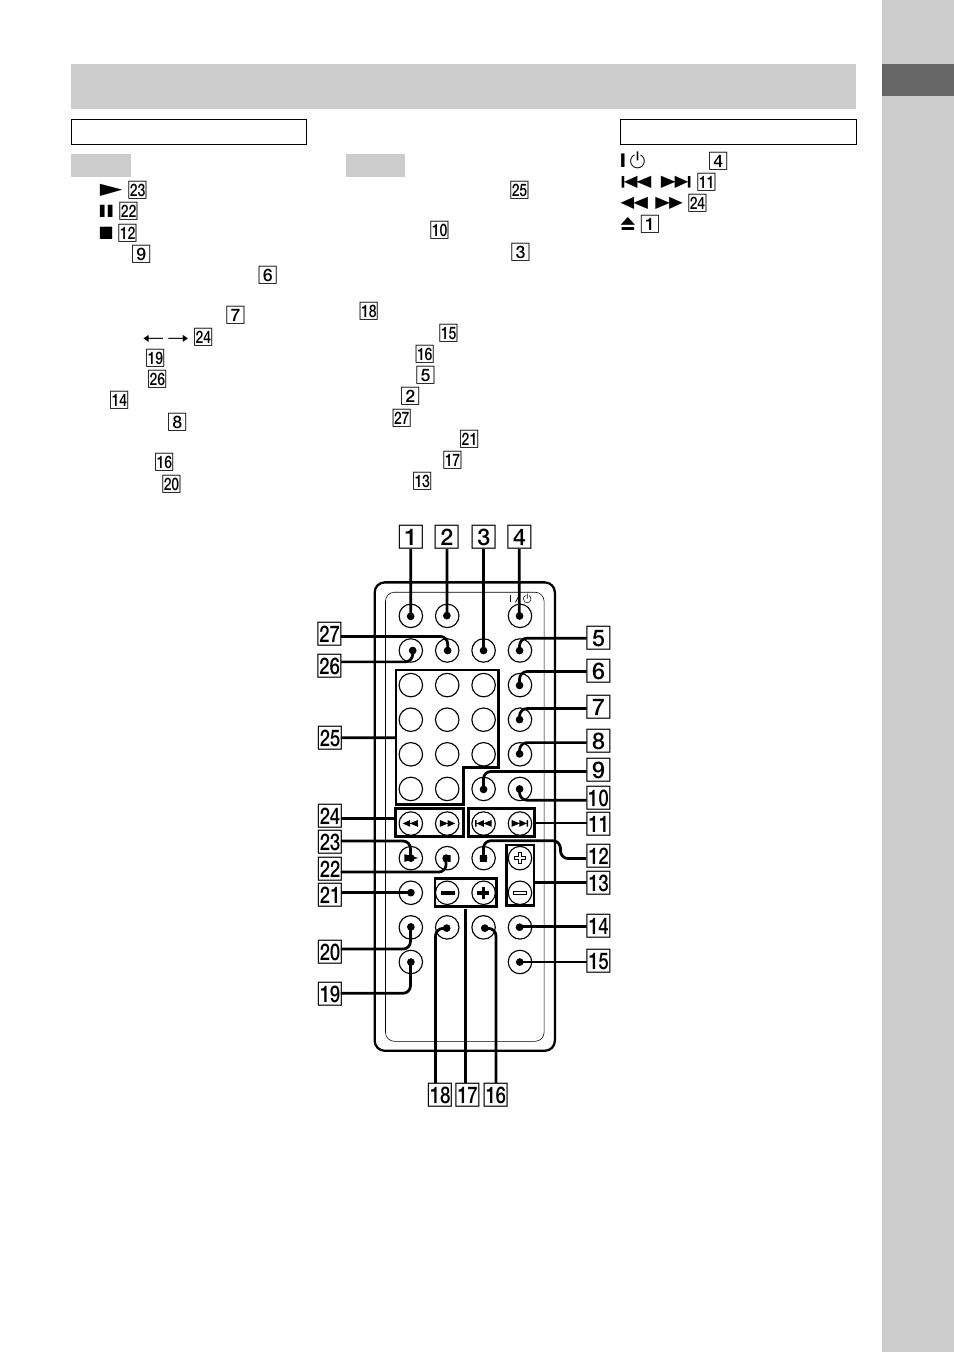 Remote control | Sony CMT-L1 User Manual | Page 5 / 84